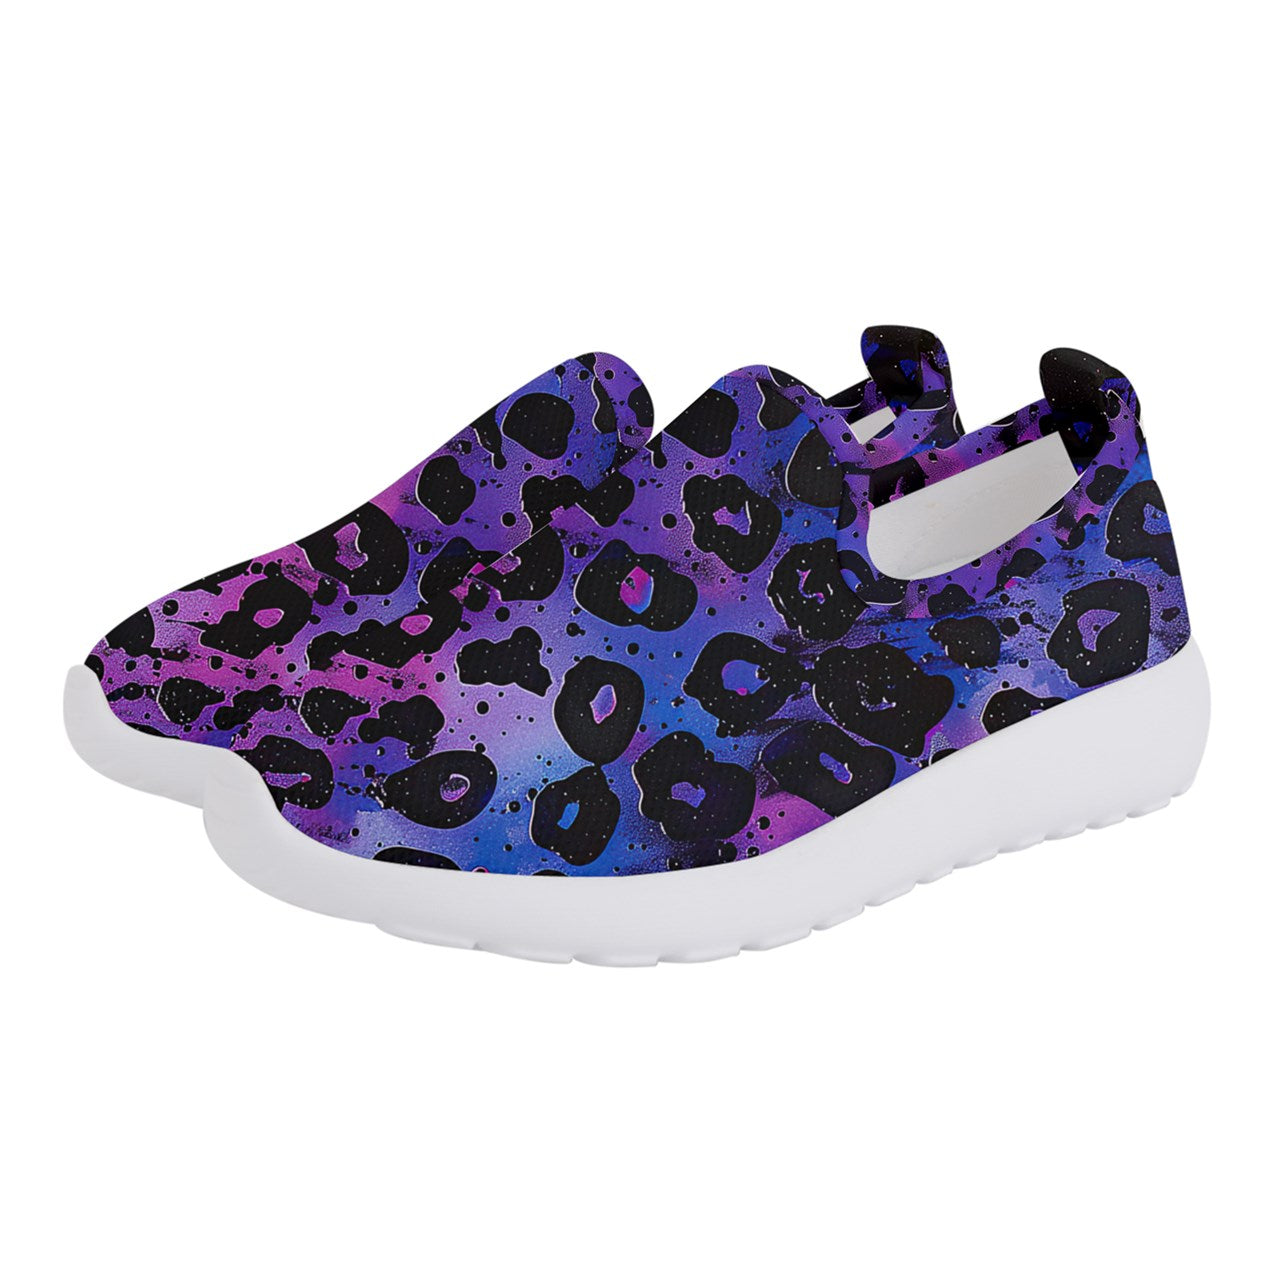 Blue Lagoon Panther Women's Slip On Sneakers